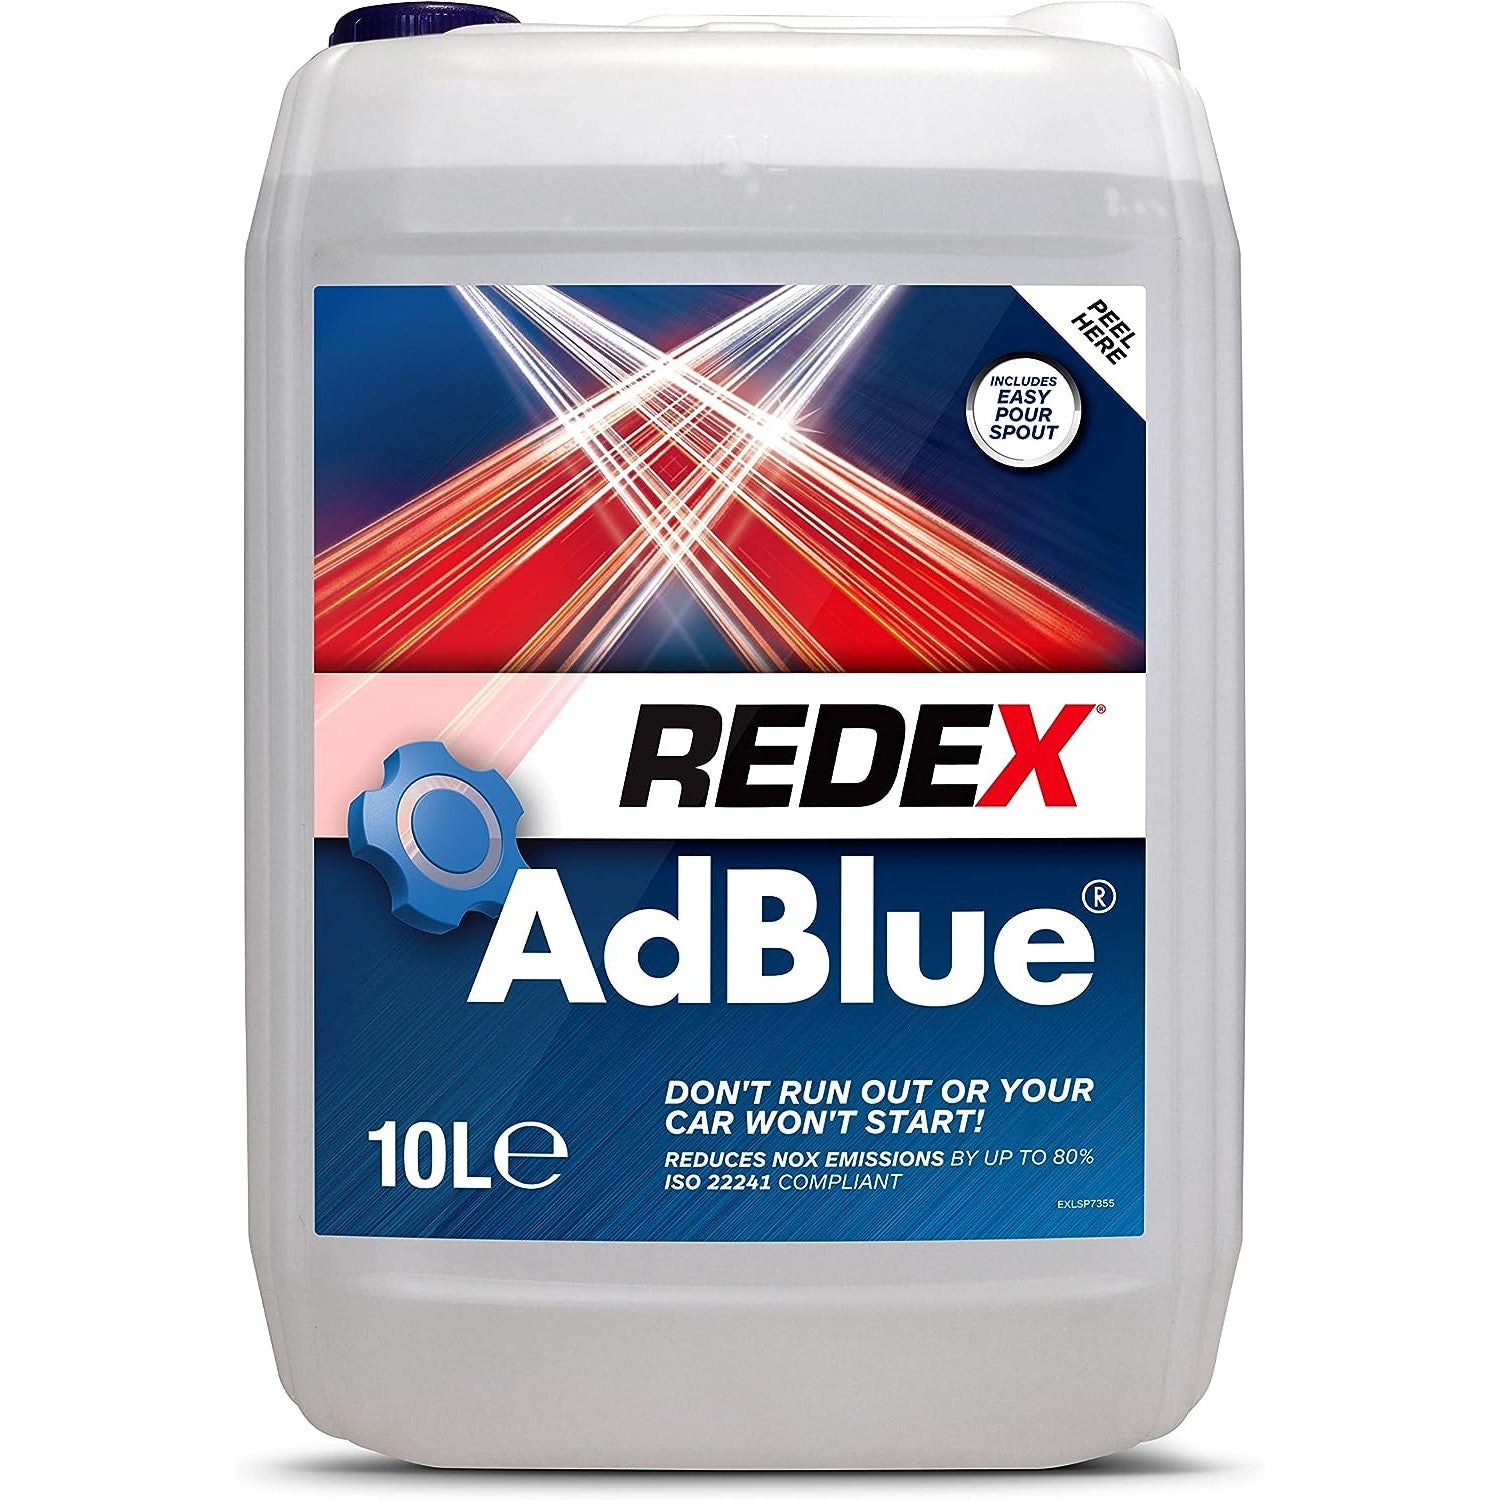 Redex Adblue with Easy Pour Spout, Suitable for All Makes and